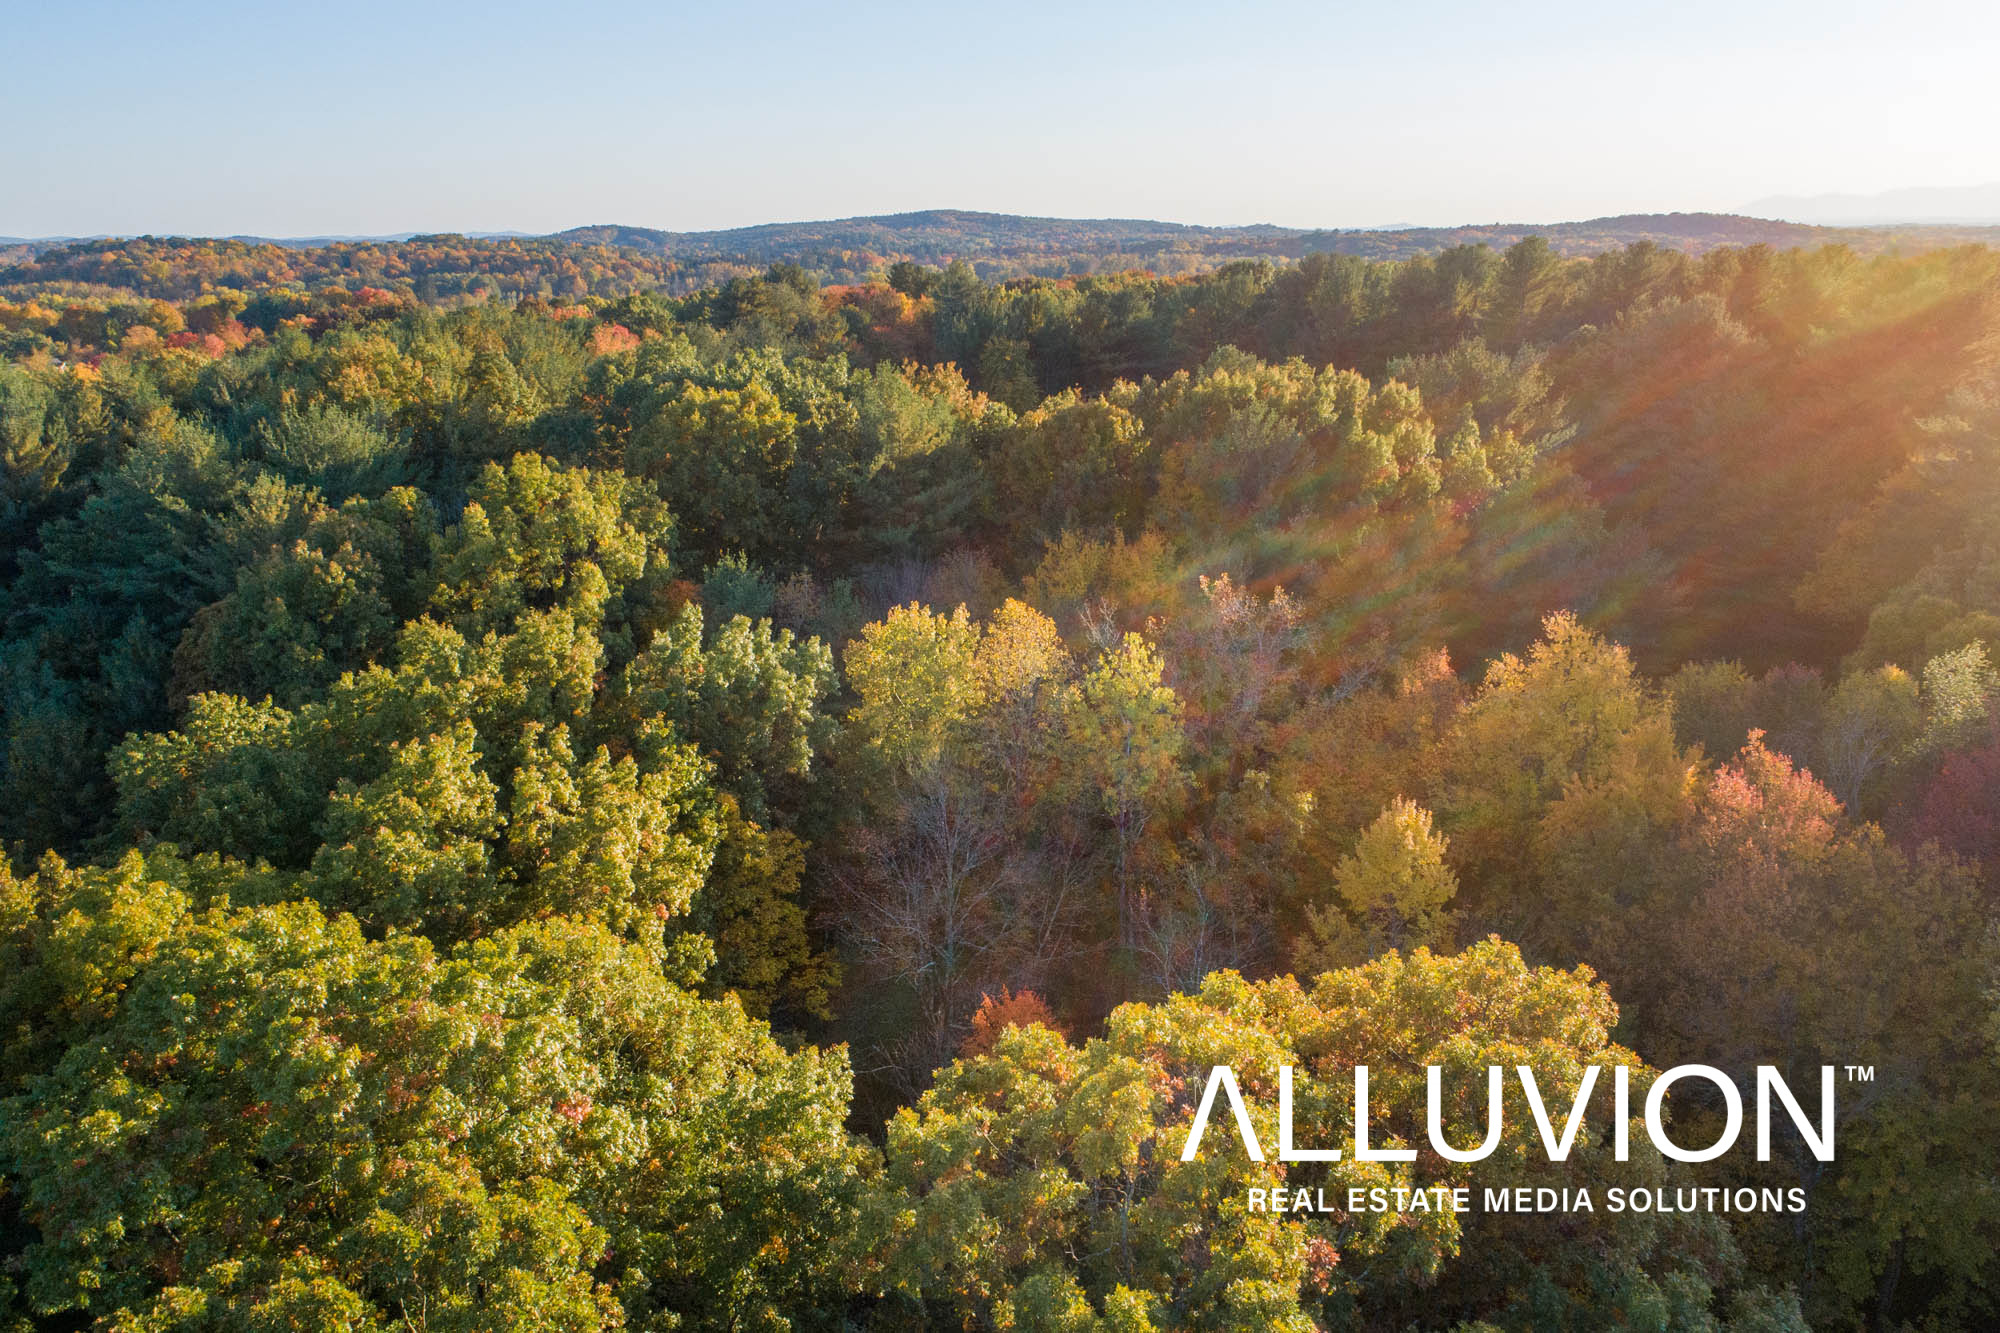 Airbnb Listing Photography in Hudson, NY – Alluvion Vacations – The Best Airbnb Photography in Catskills and Hudson Valley